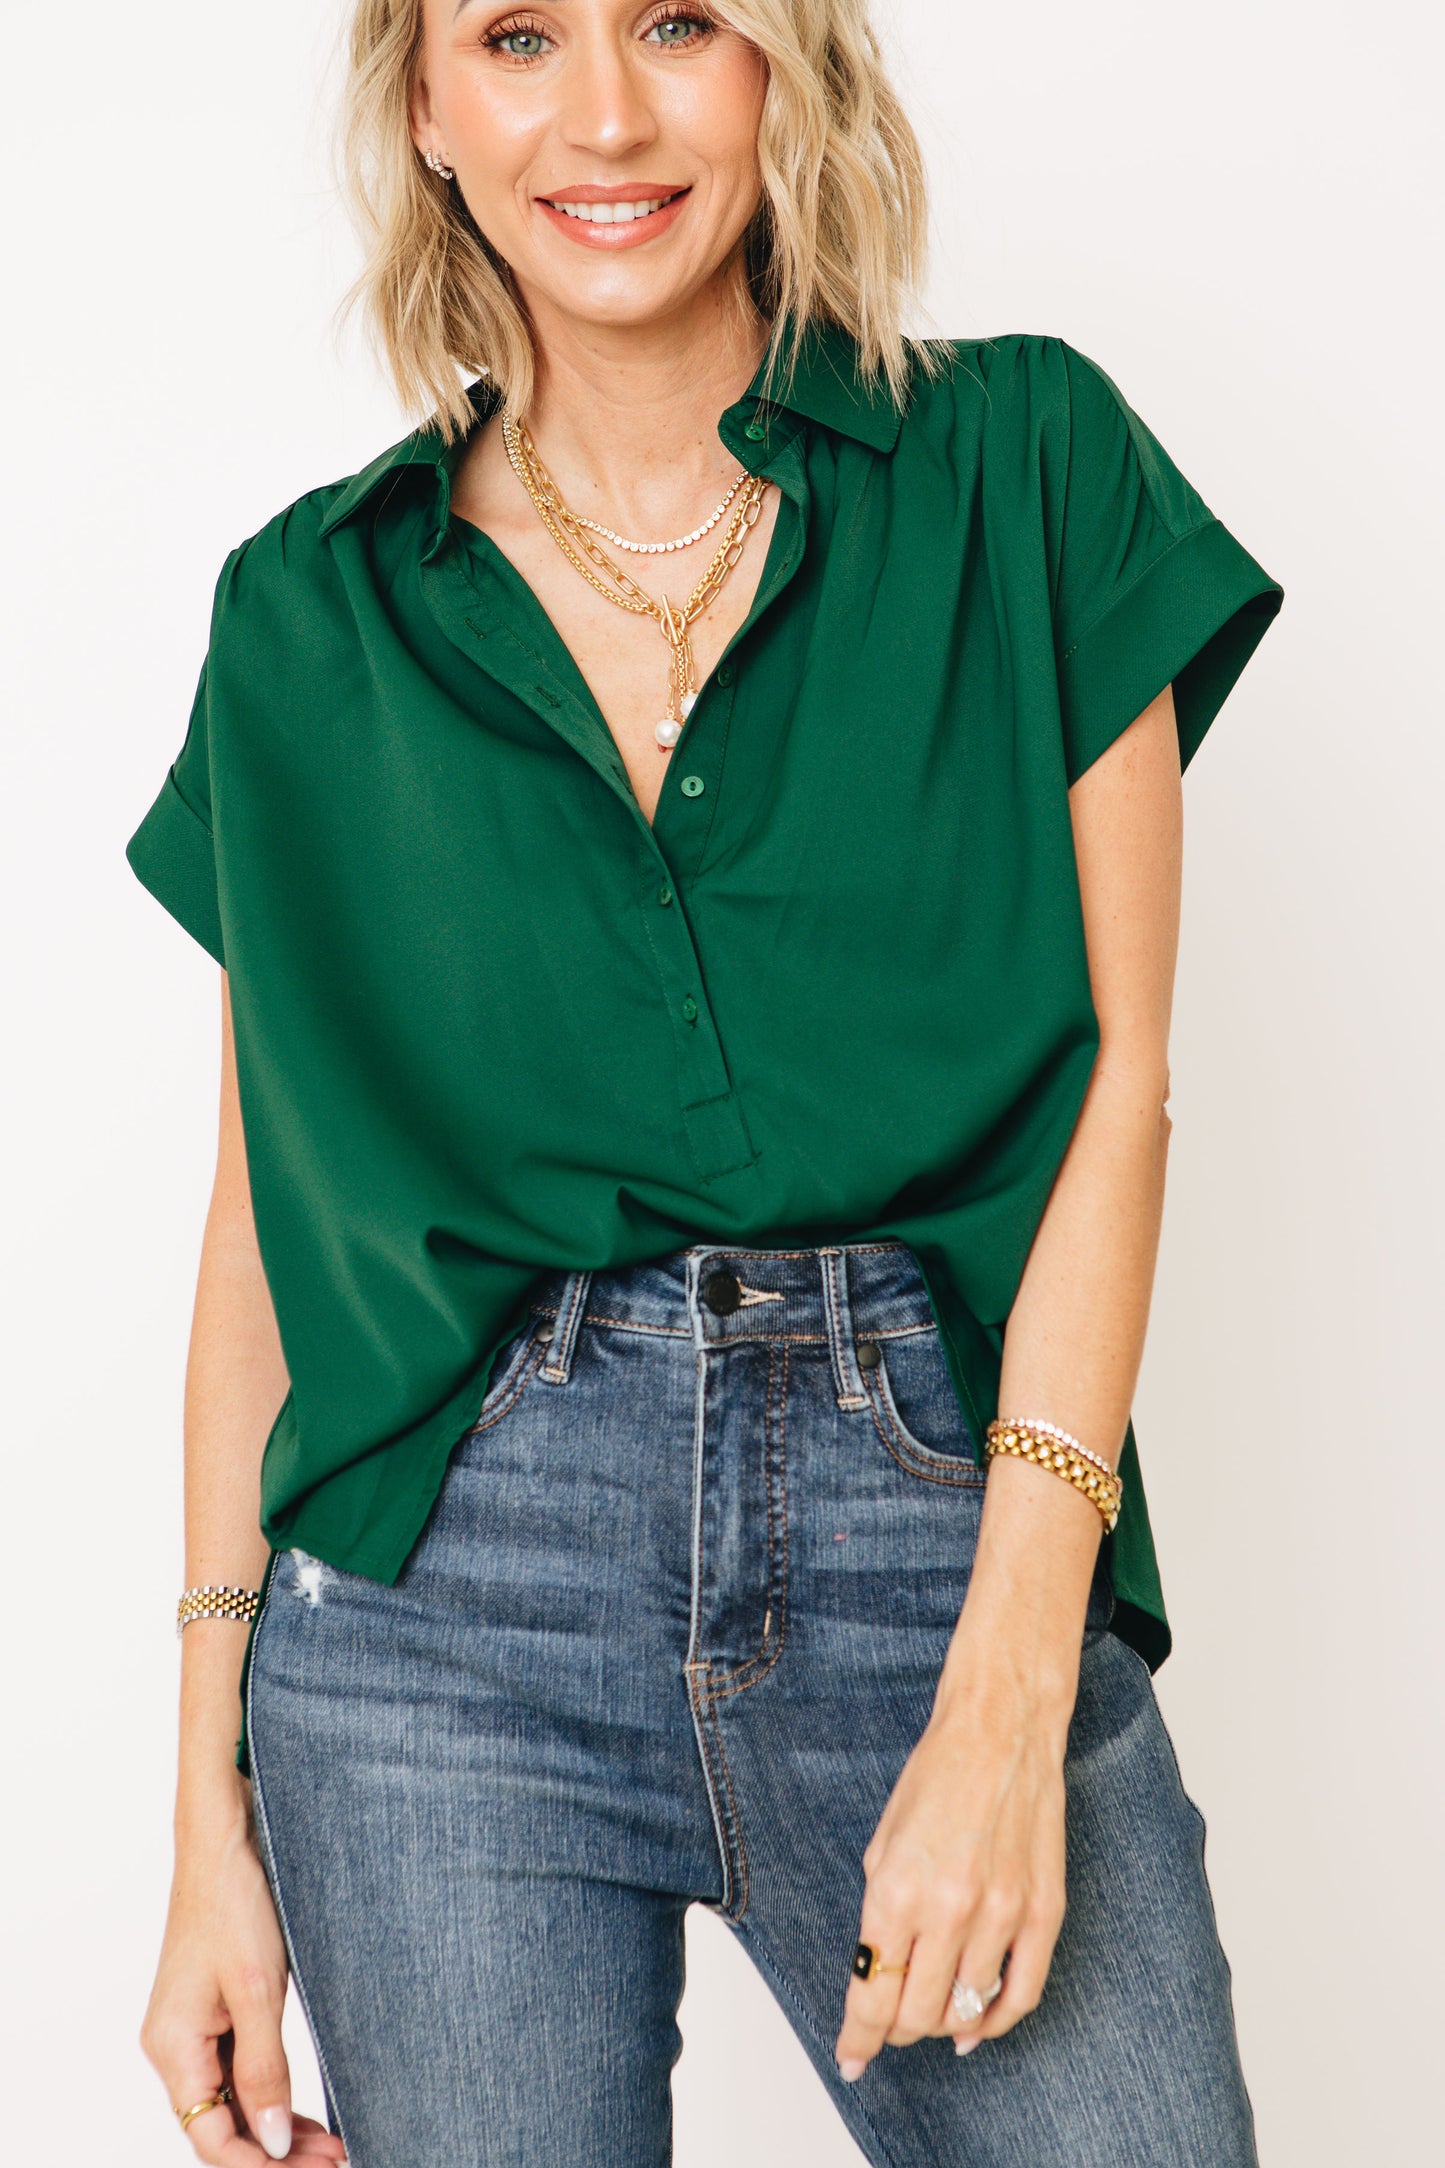 The Enchantress Collared Button Up Top (S-L)